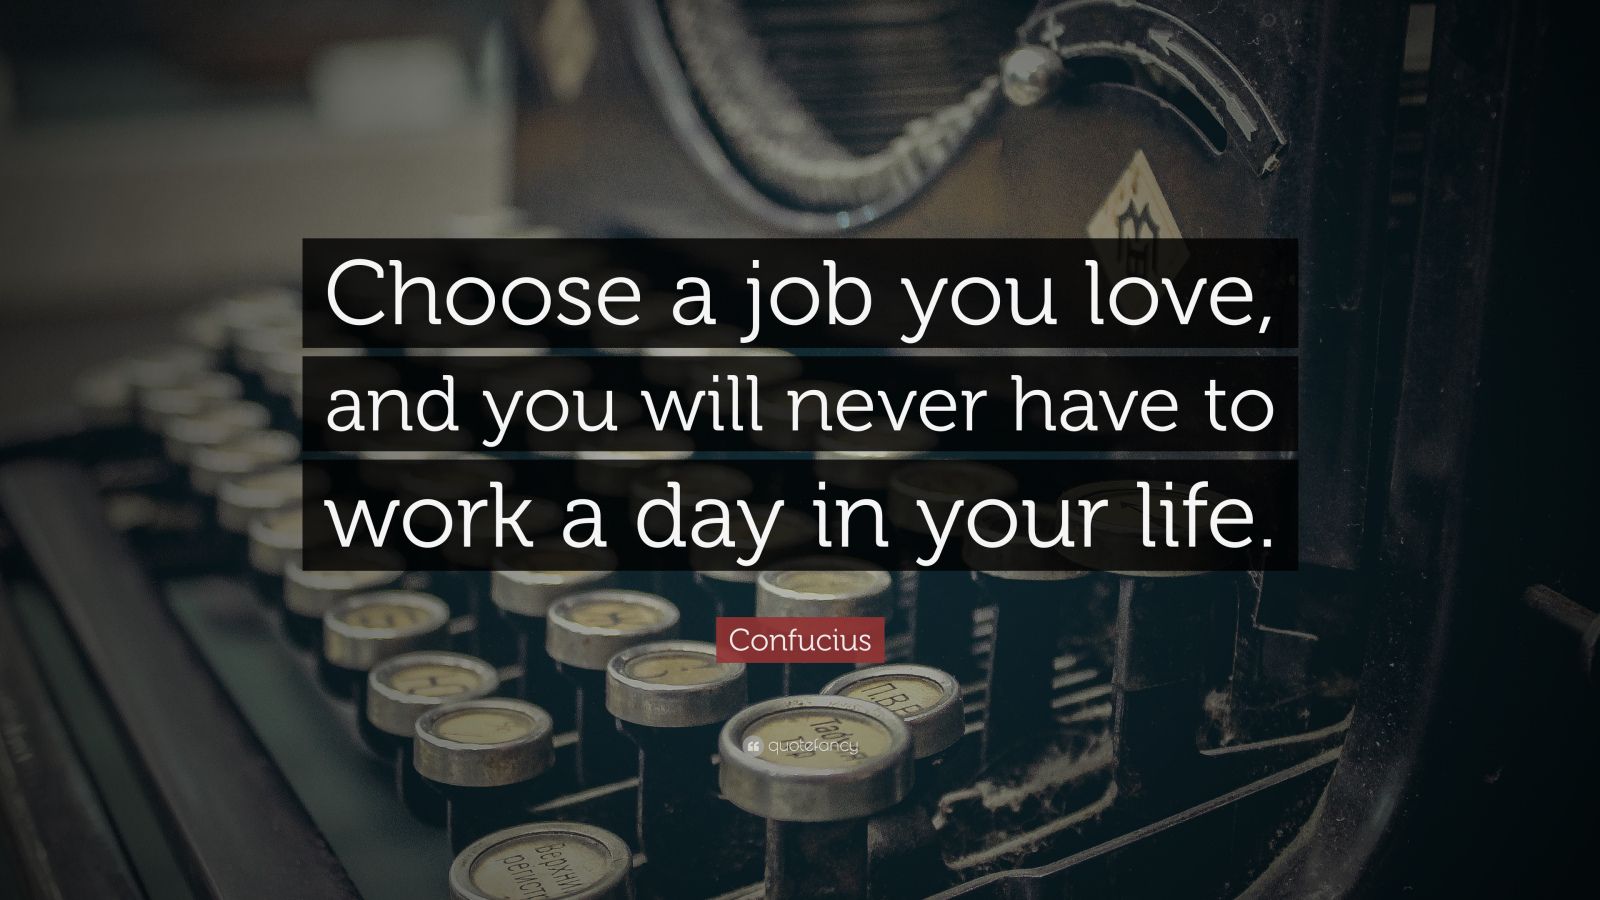 Confucius Quote “Choose a job you love and you will never have to